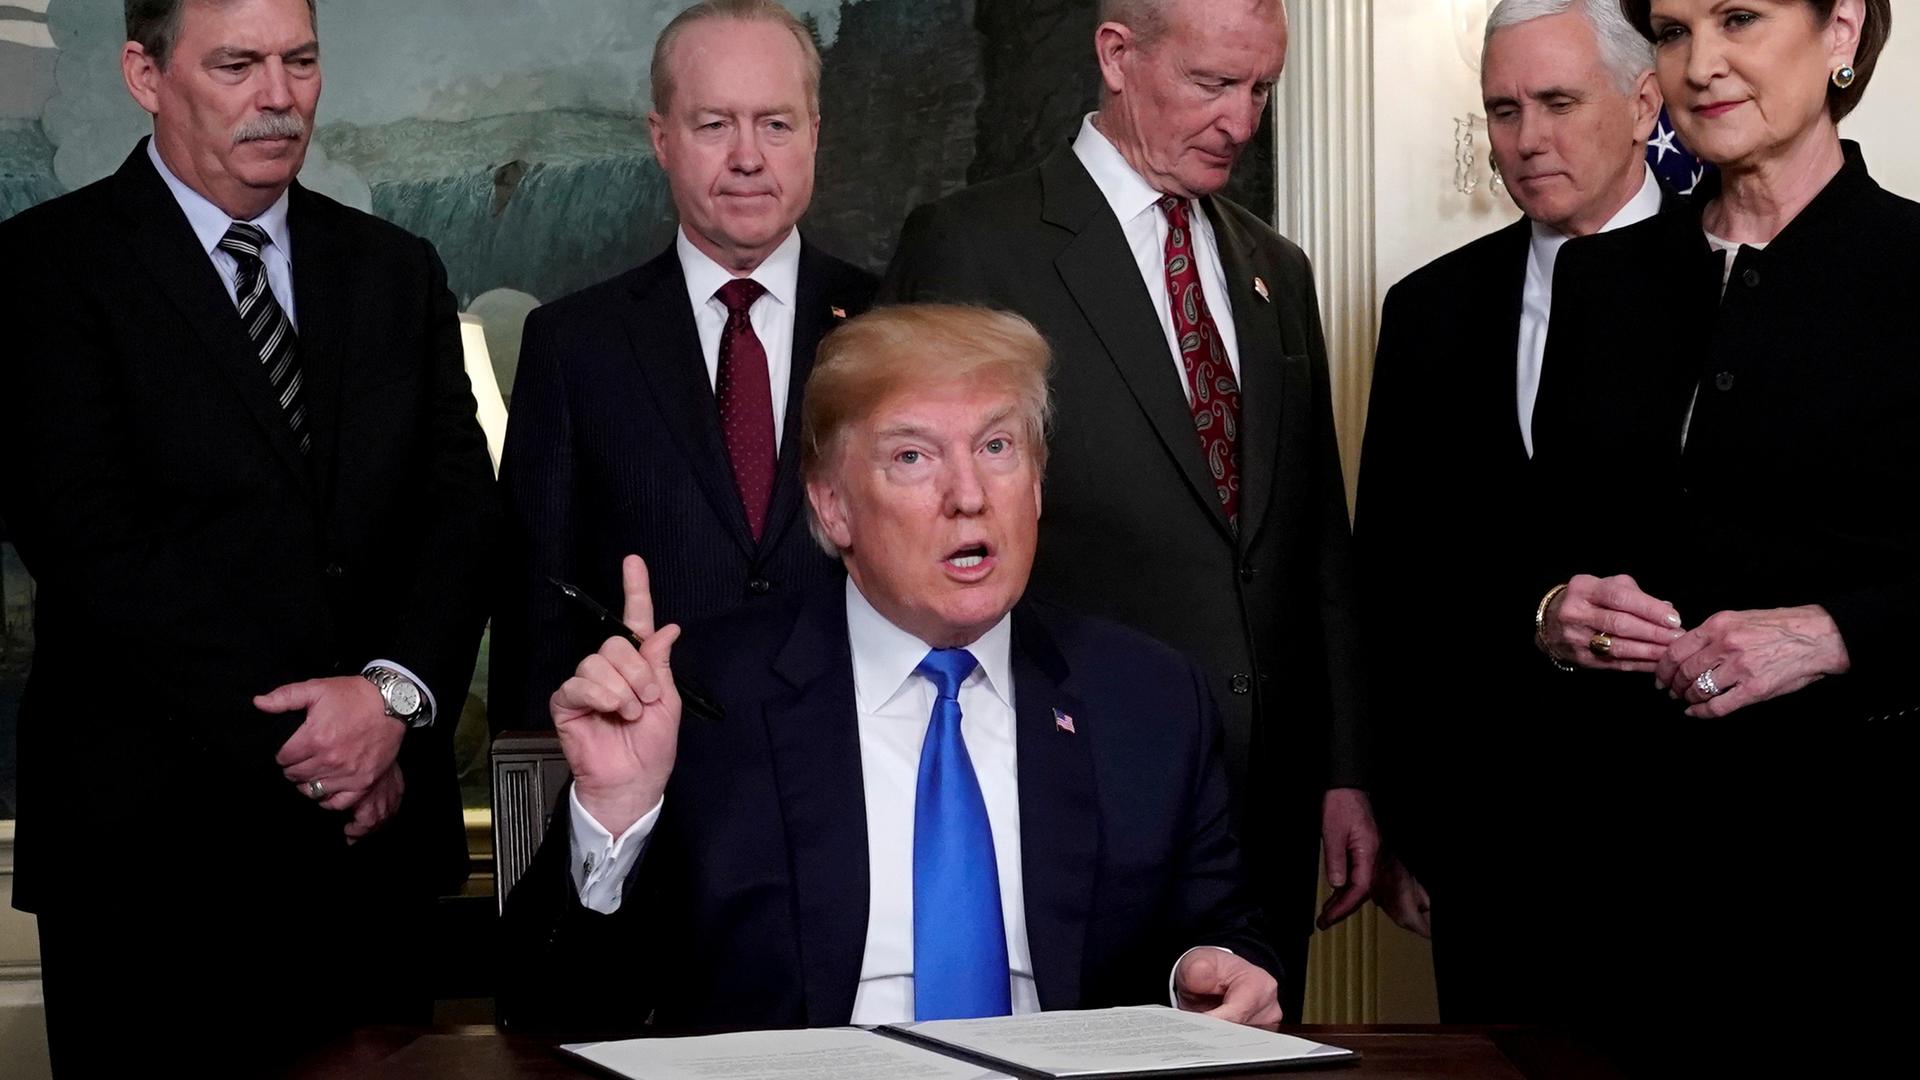 President Donald Trump, surrounded by business leaders and administration officials, prepares to sign a memorandum on intellectual property tariffs on high-tech goods from China, at the White House in Washington, March 22, 2018. 